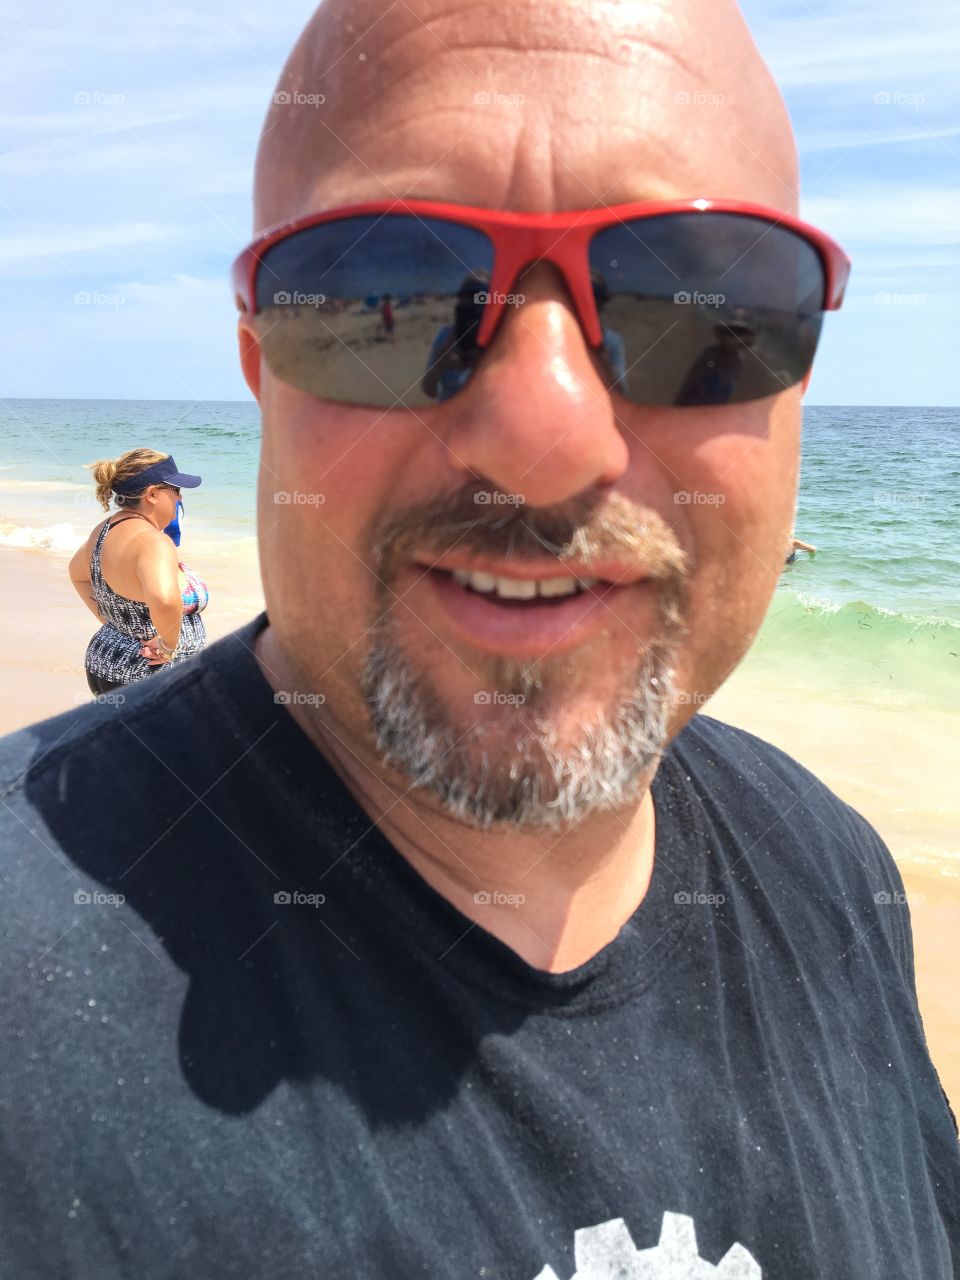 Man with sunglasses at the beach